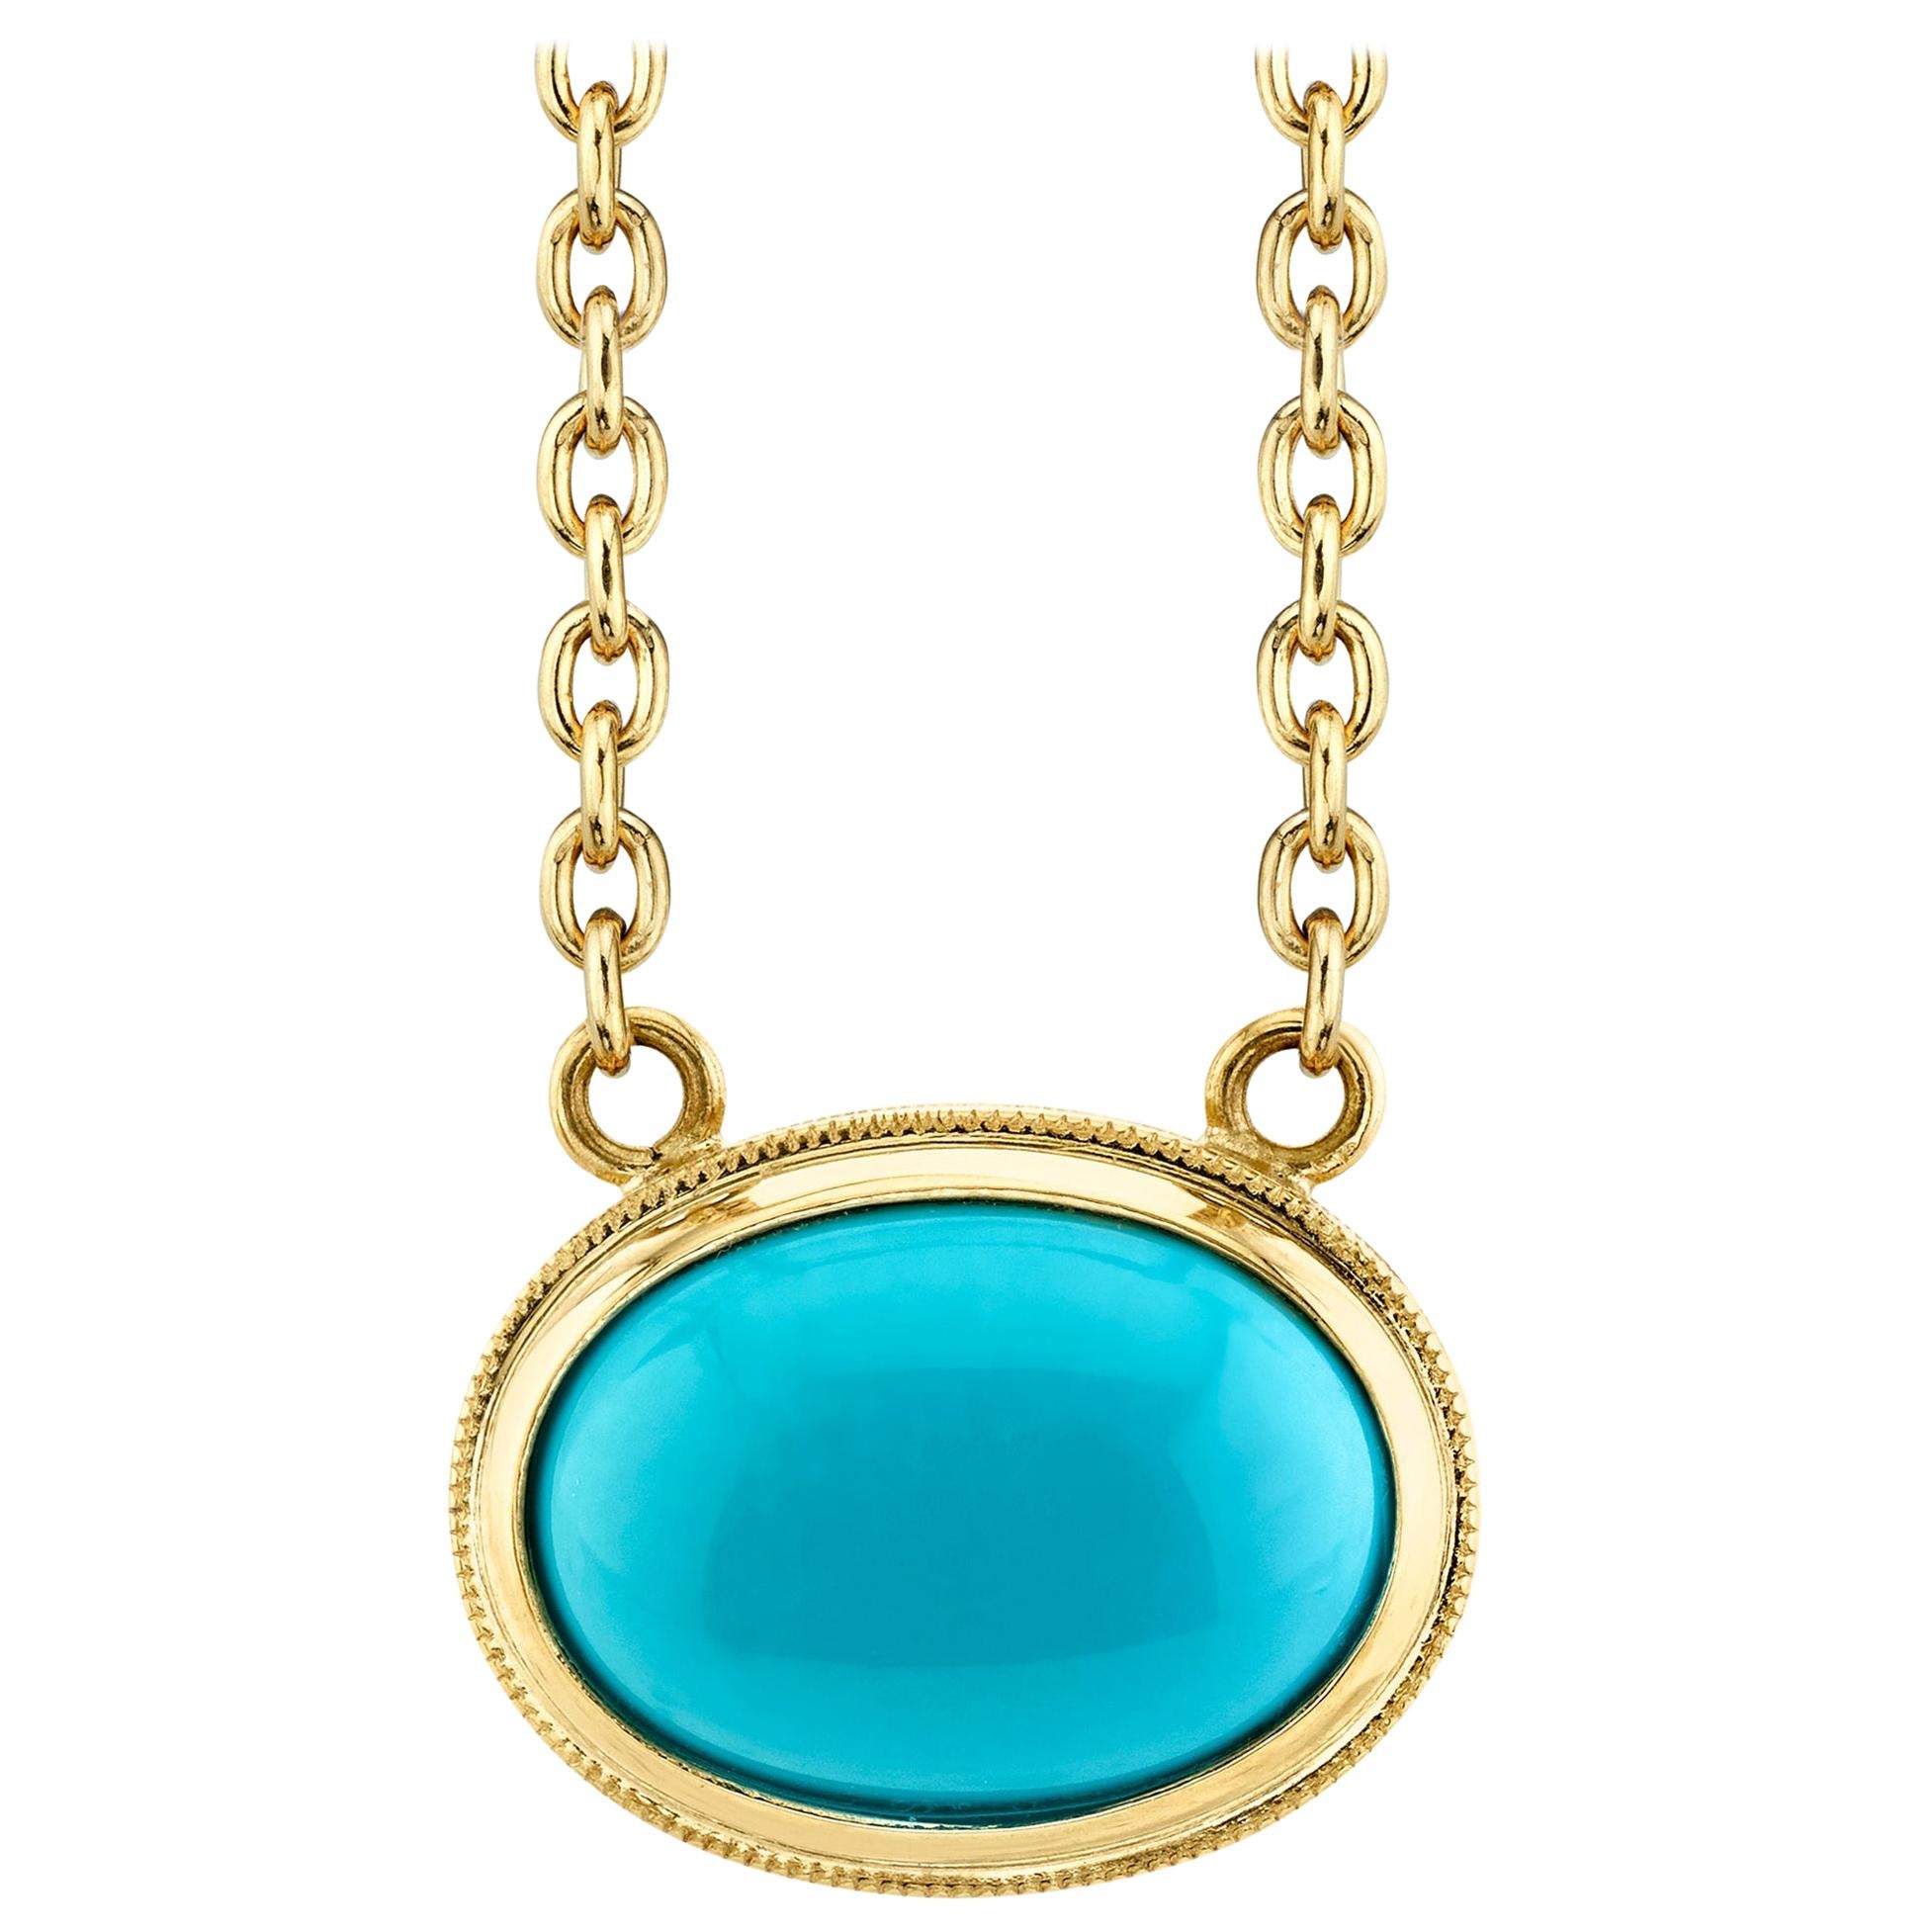 6.79 Carat Sleeping Beauty Turquoise Cabochon and 18k Yellow Gold Chain Necklace